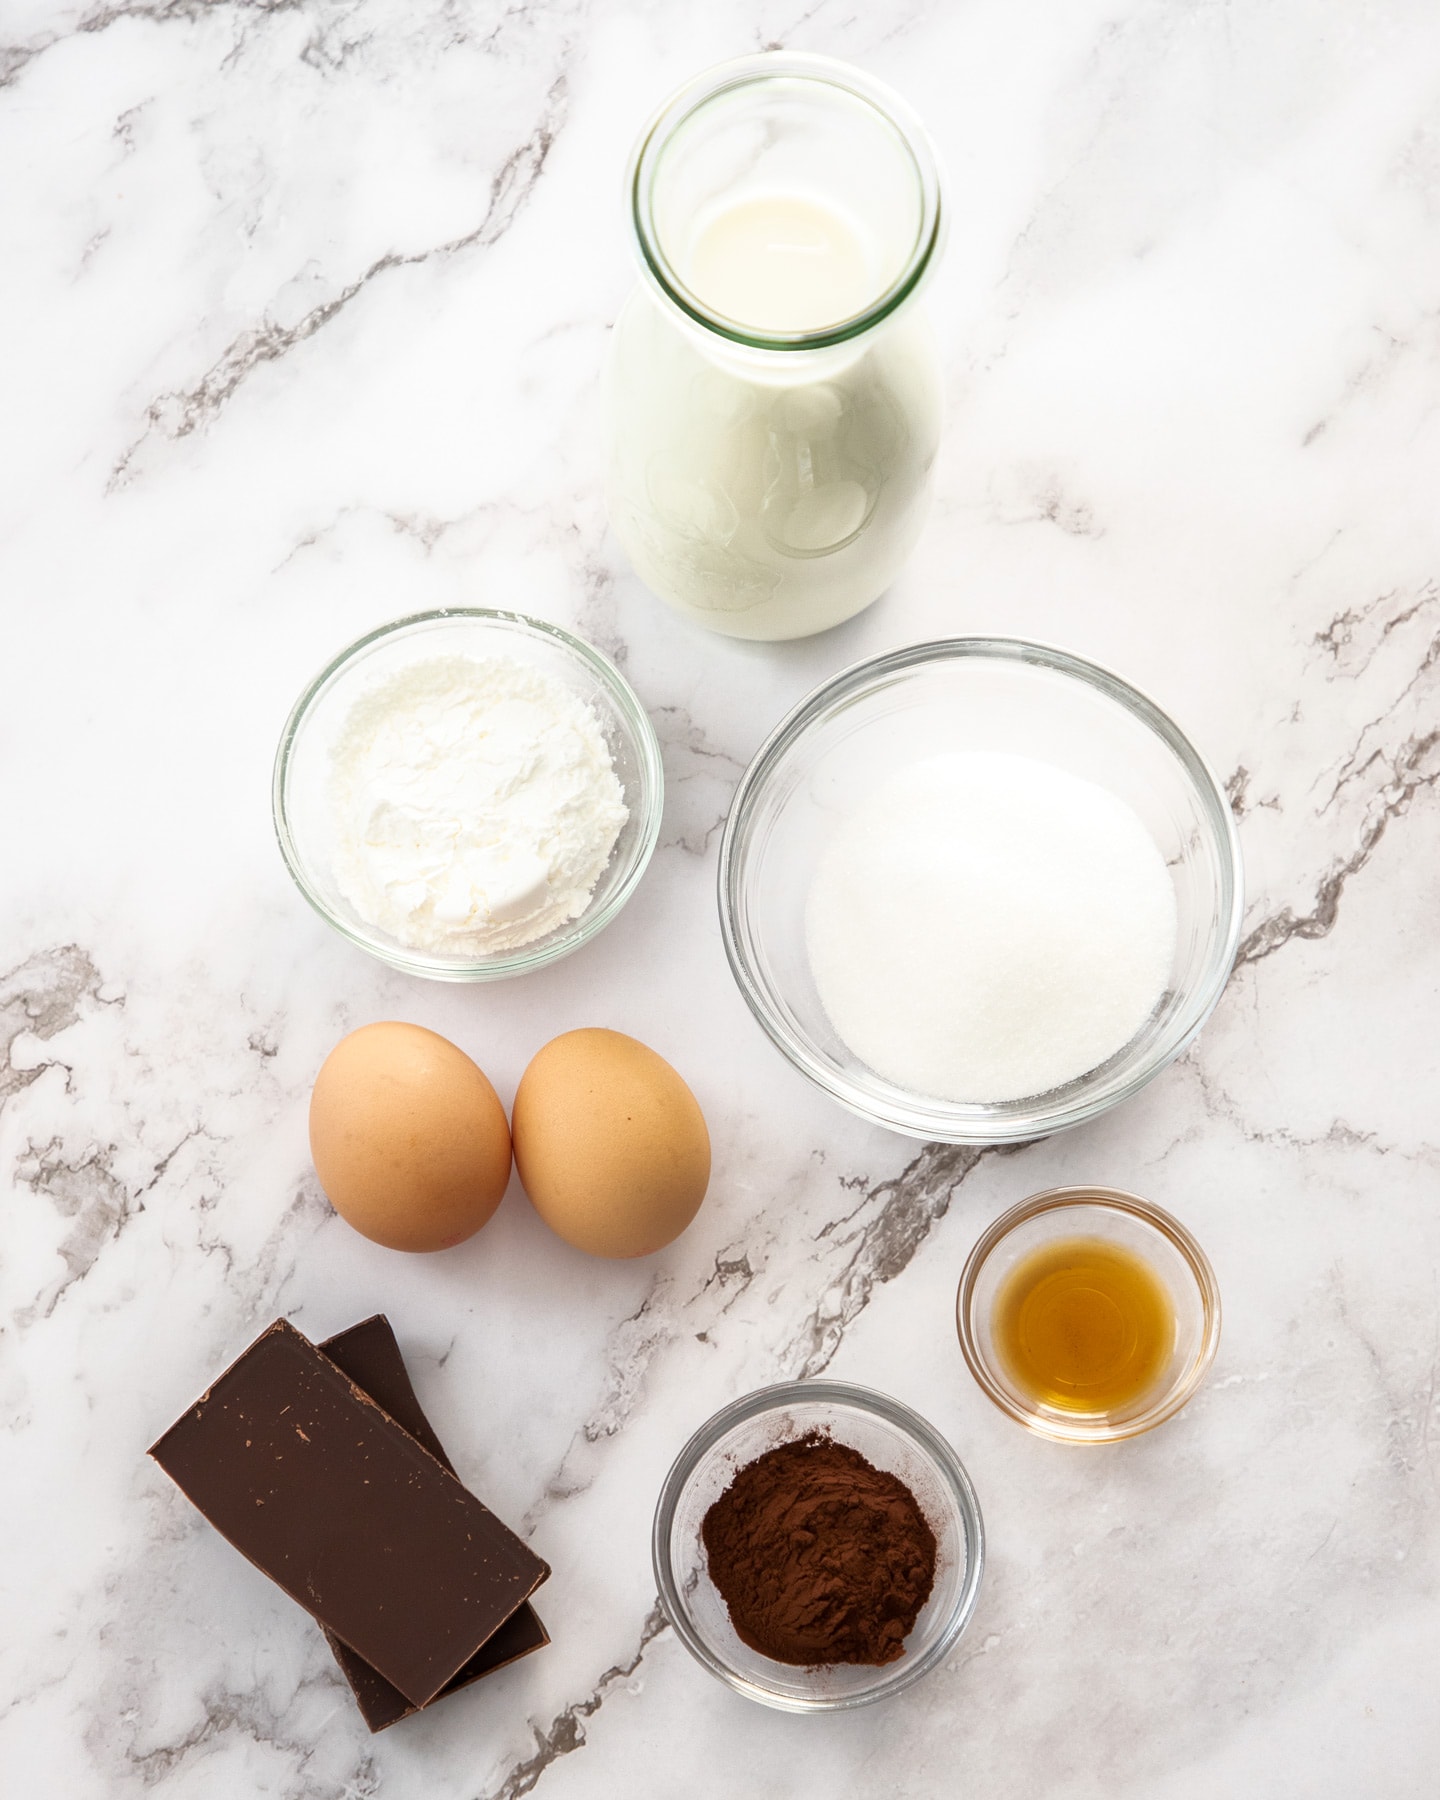 Ingredients for chocolate pastry cream on a marble surface.